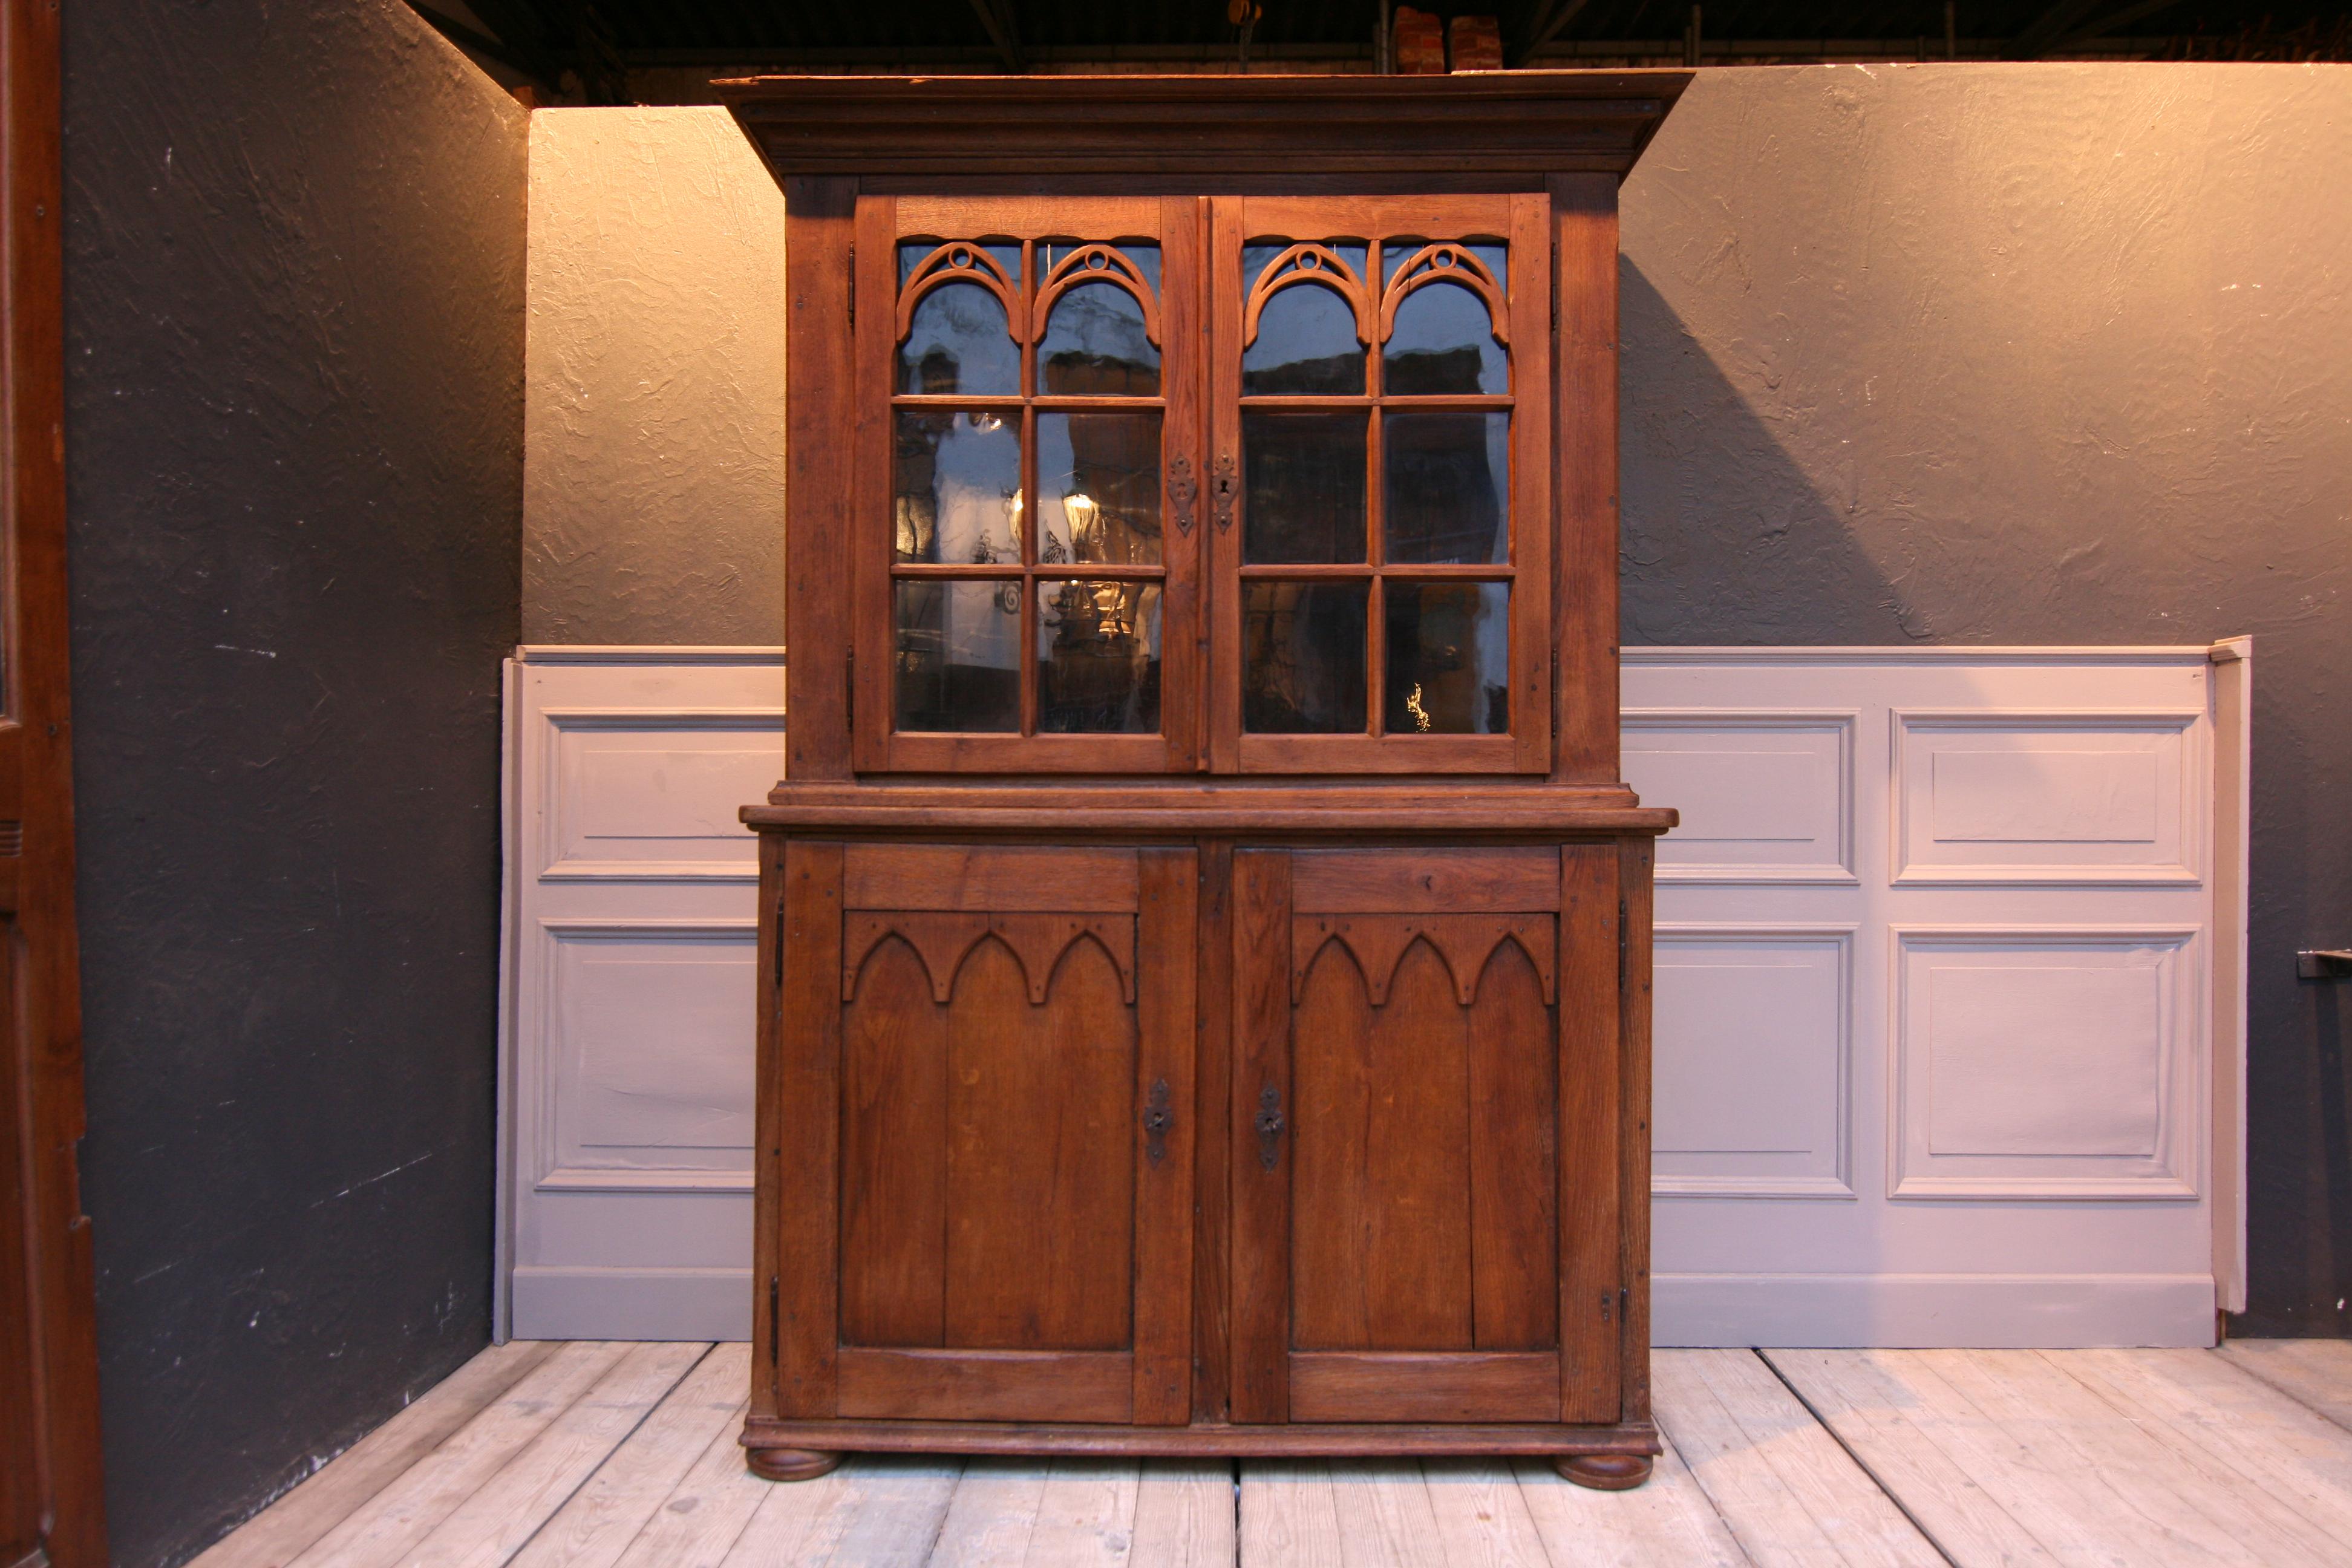 Beautiful Provincial display cabinet from the 18th century made of solid oak. 
Consisting of an upper part and a lower part.
The upper part features 2 showcase doors, hanging on external hinges, with trace work in which is the old glass. There are 3